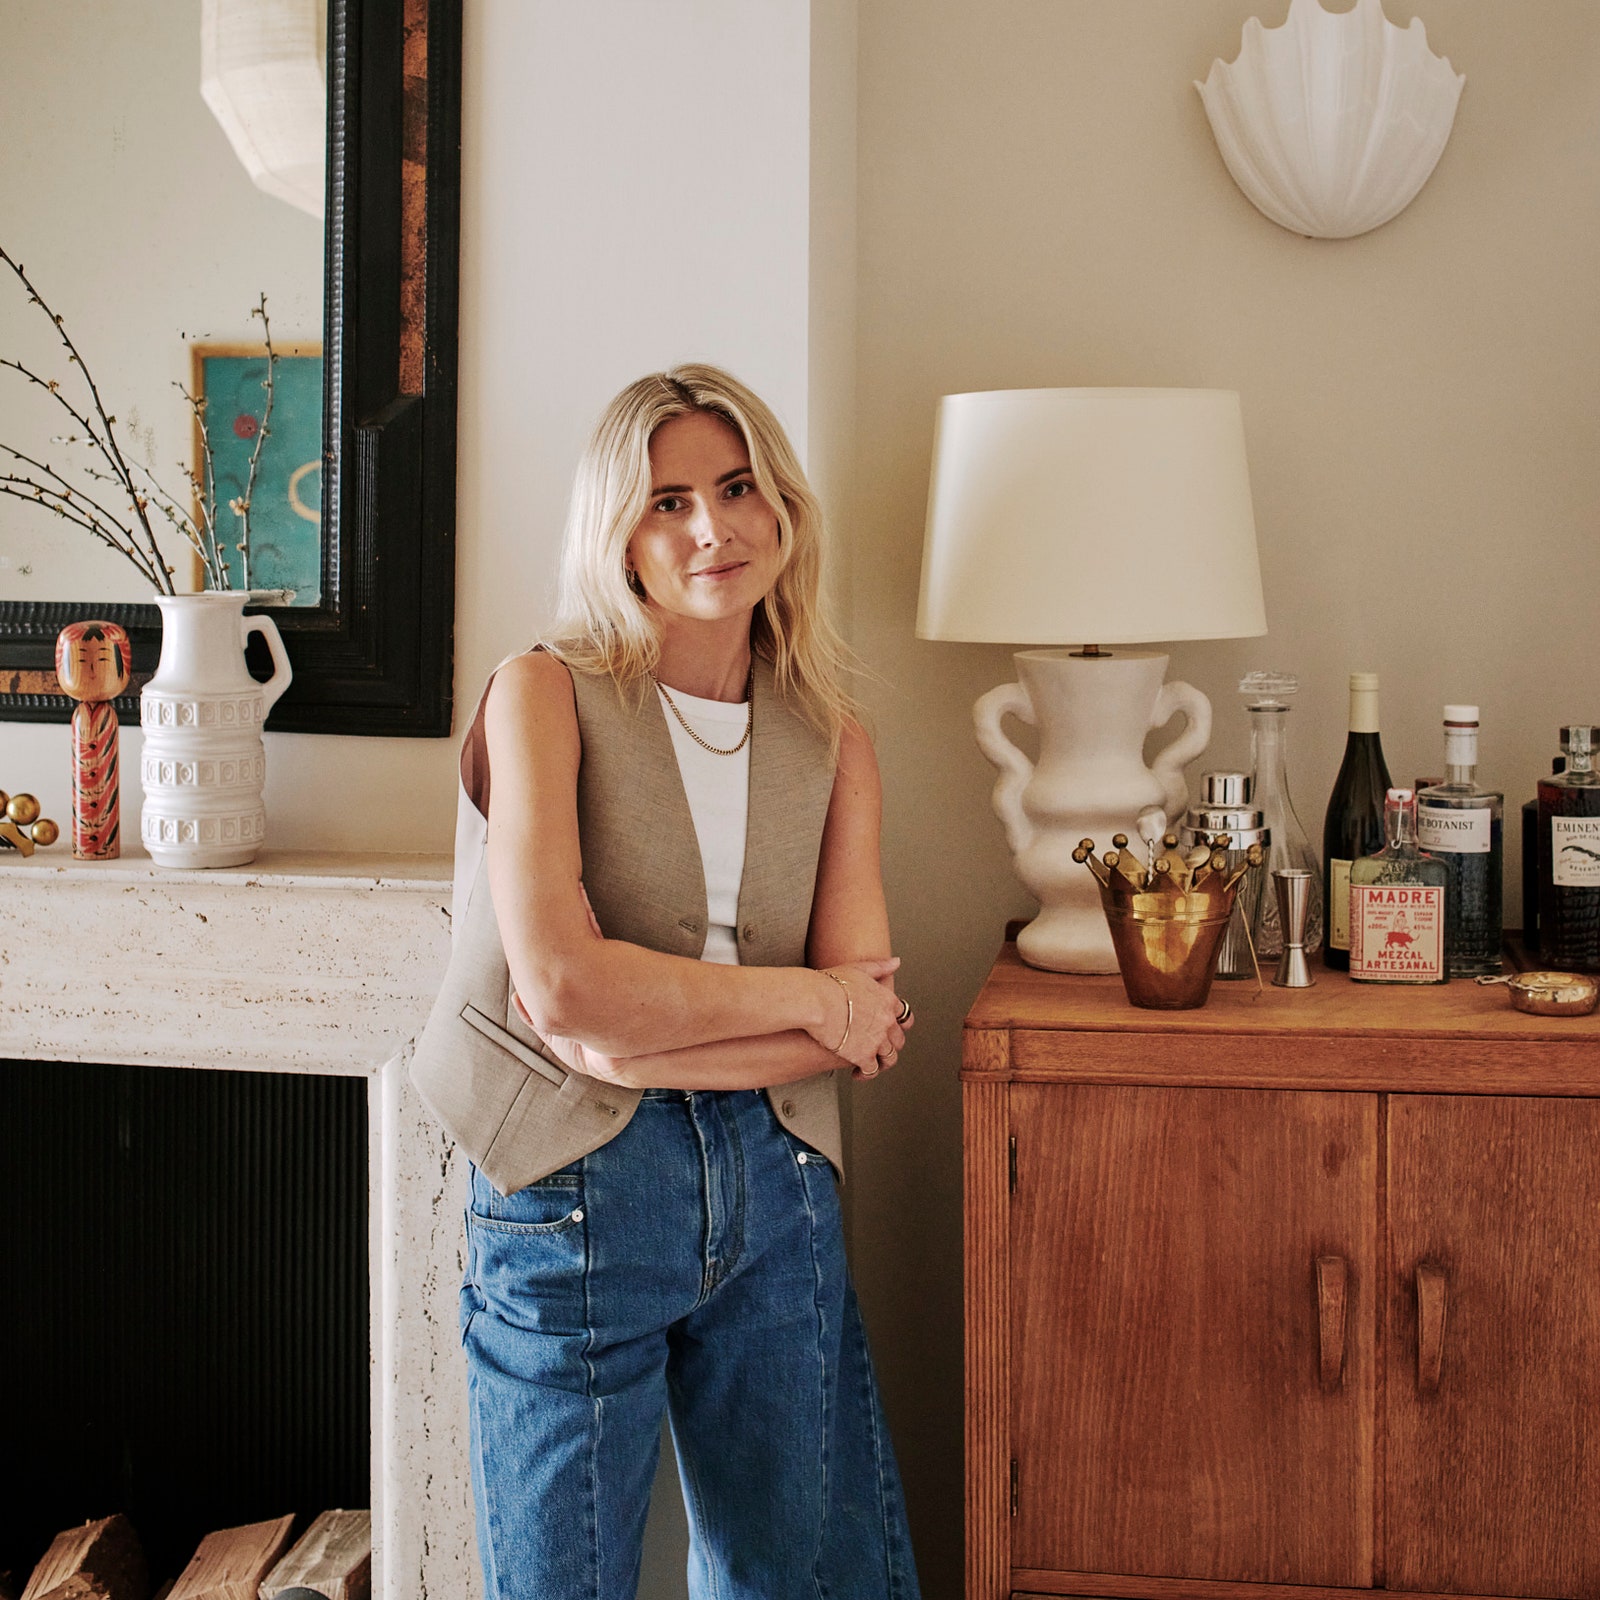 12 things to know before starting a house renovation, according to Lucy Williams